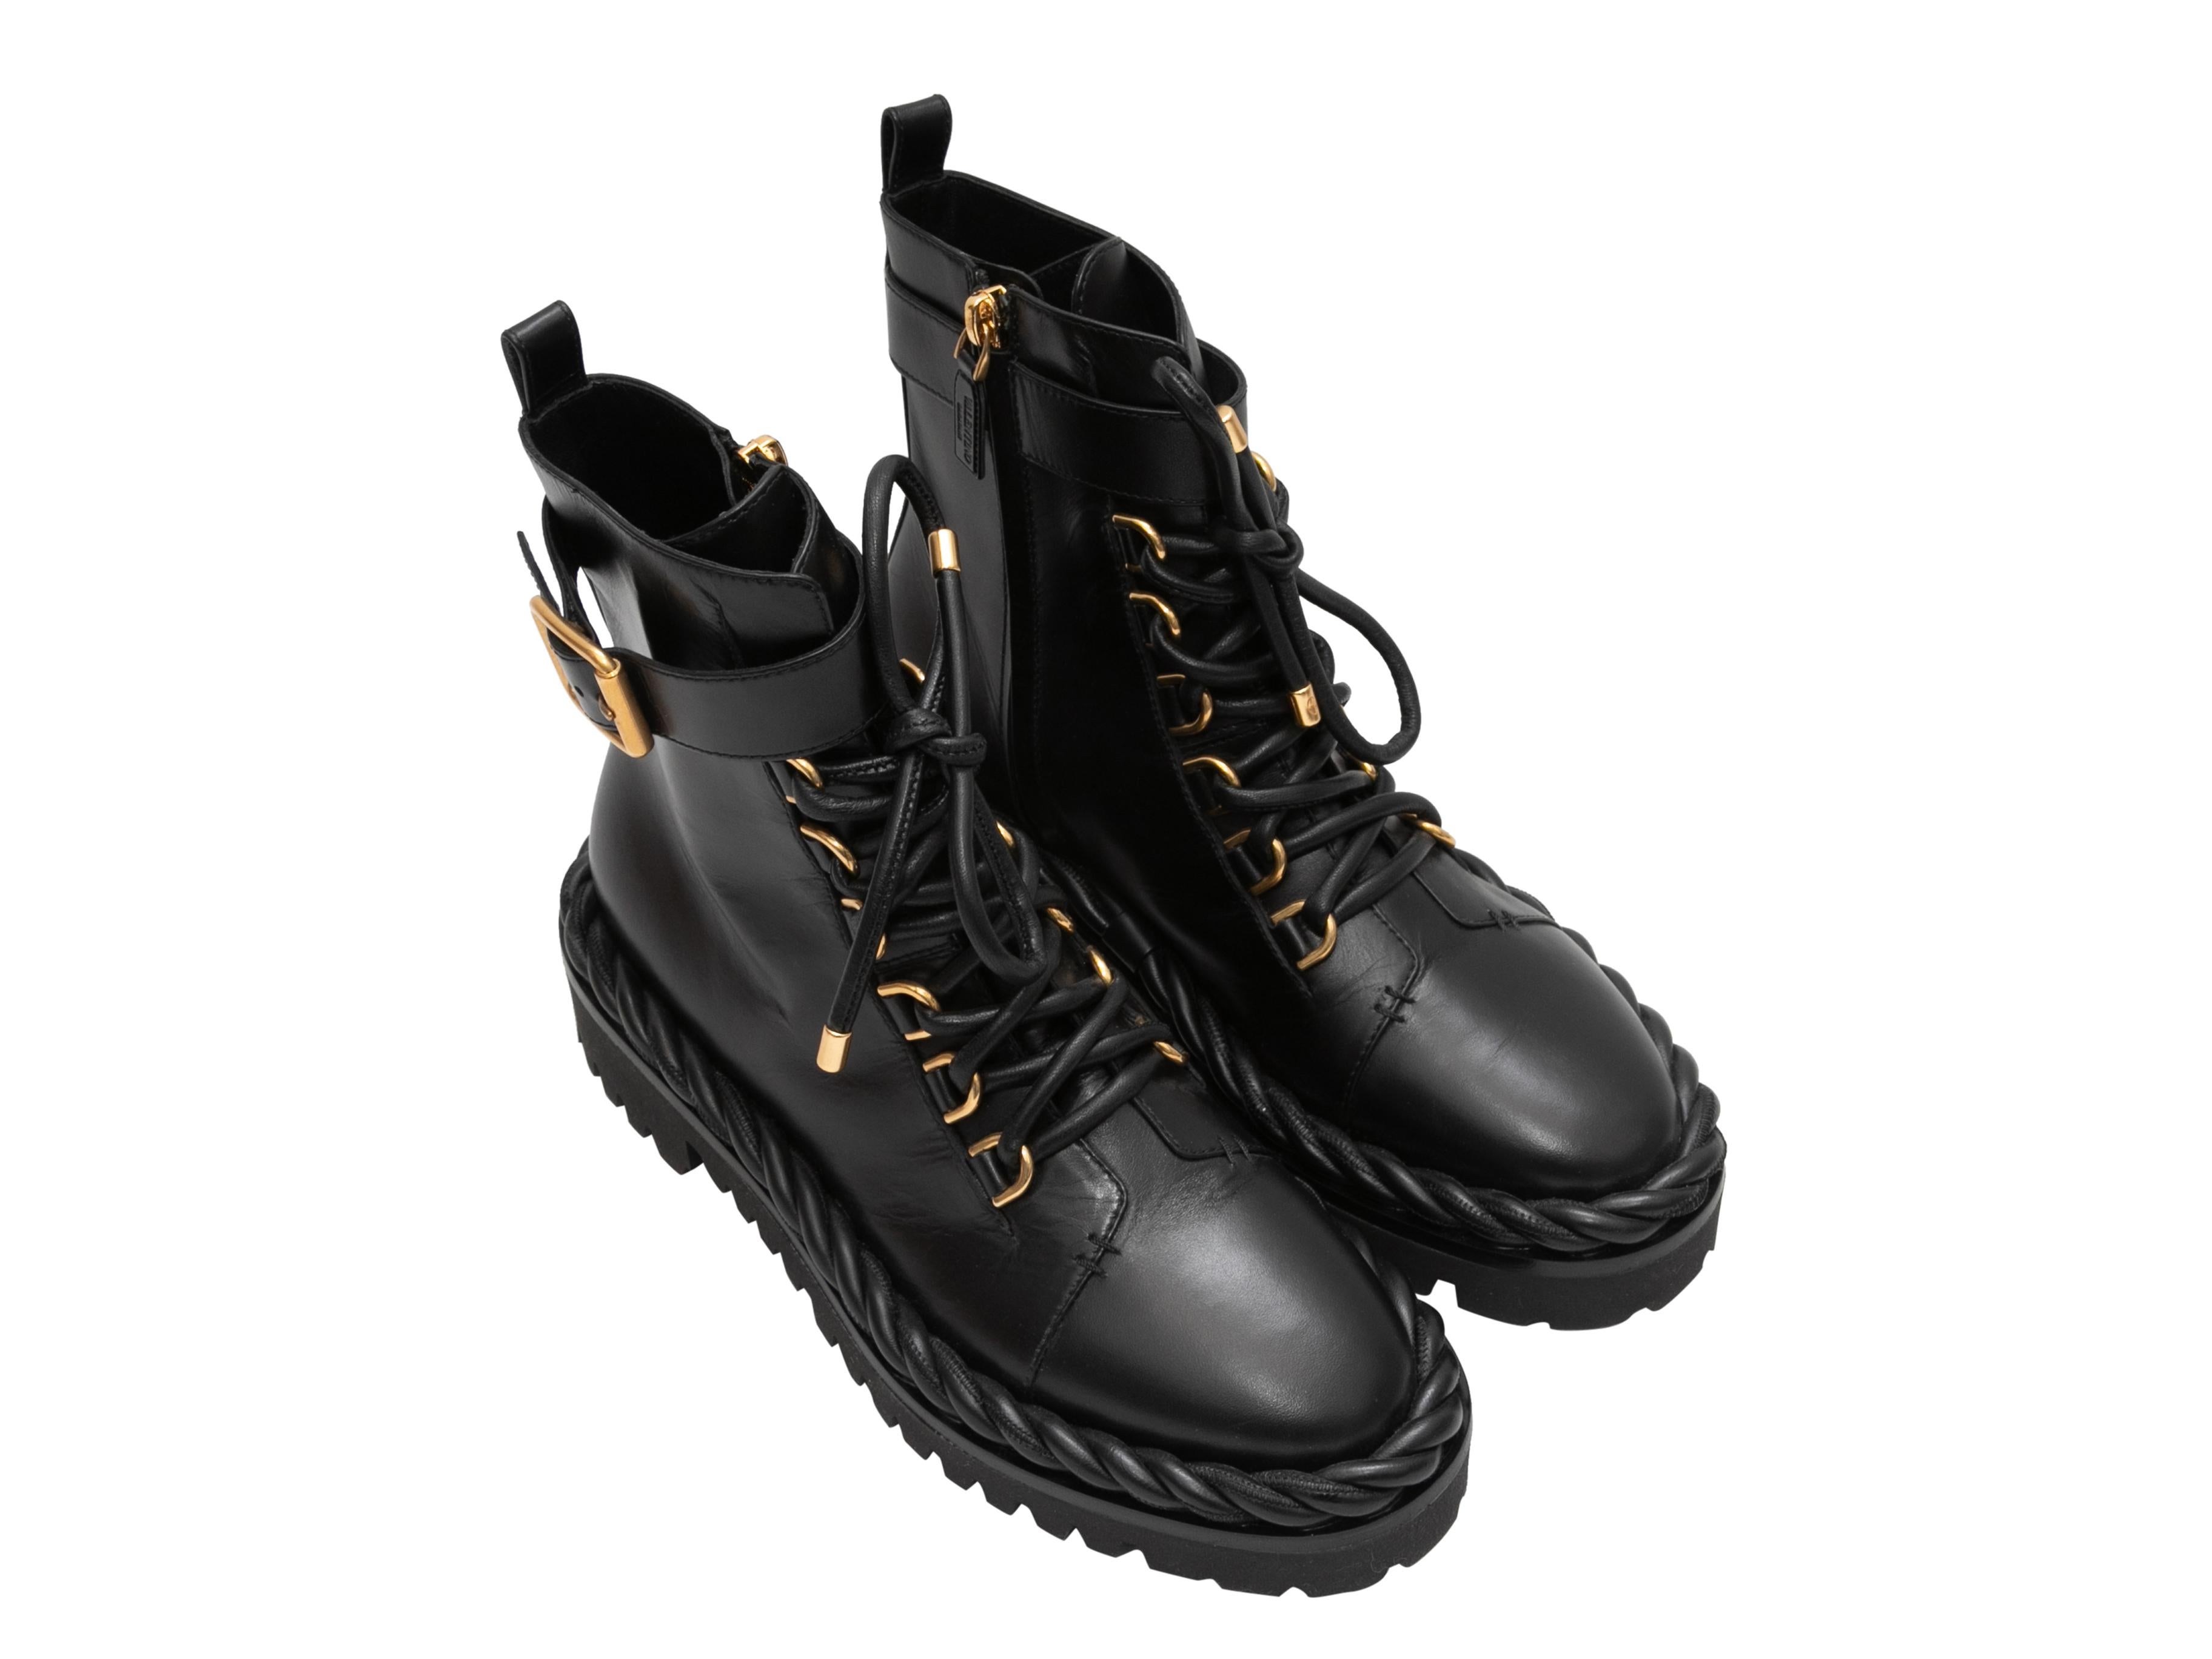 Black leather combat boots by Valentino. Gold-tone hardware. Twisted trim at lug soles. Lace-up and buckle detailing at tops. Zip closures at inner sides. 6